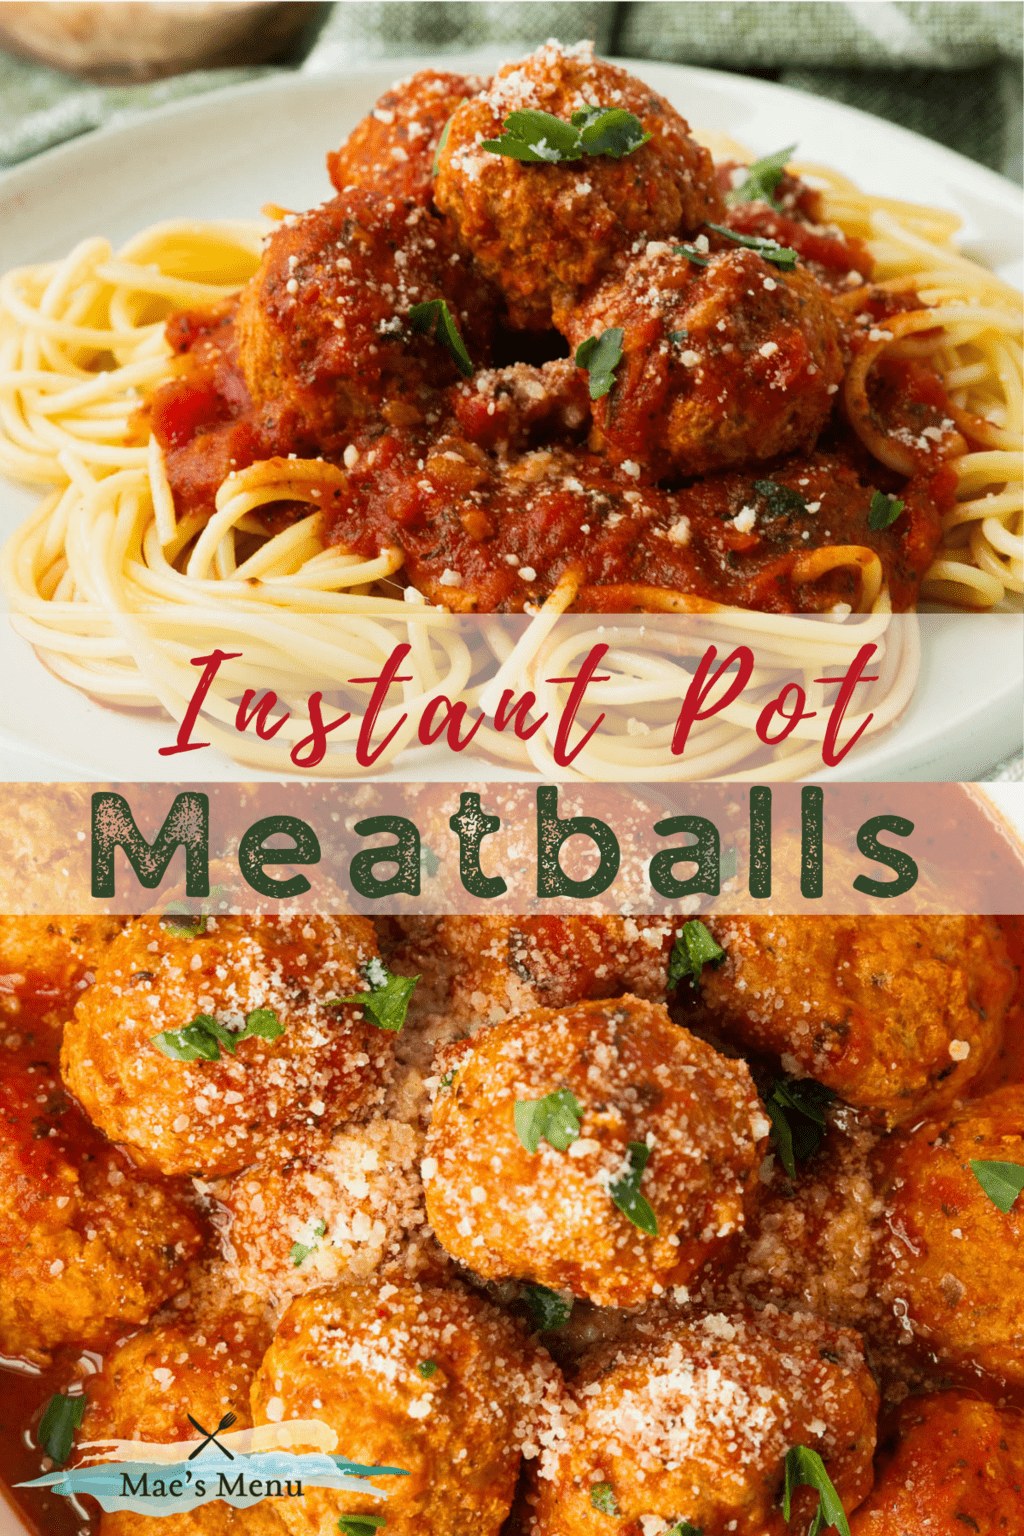 A pinterest pin for Instant Pot Meatballs. On the top photo is a shot of spaghetti and meatballs on a plate. On the bottom photo is an overhead shot of the meatballs covered in parmesan and herbs. 